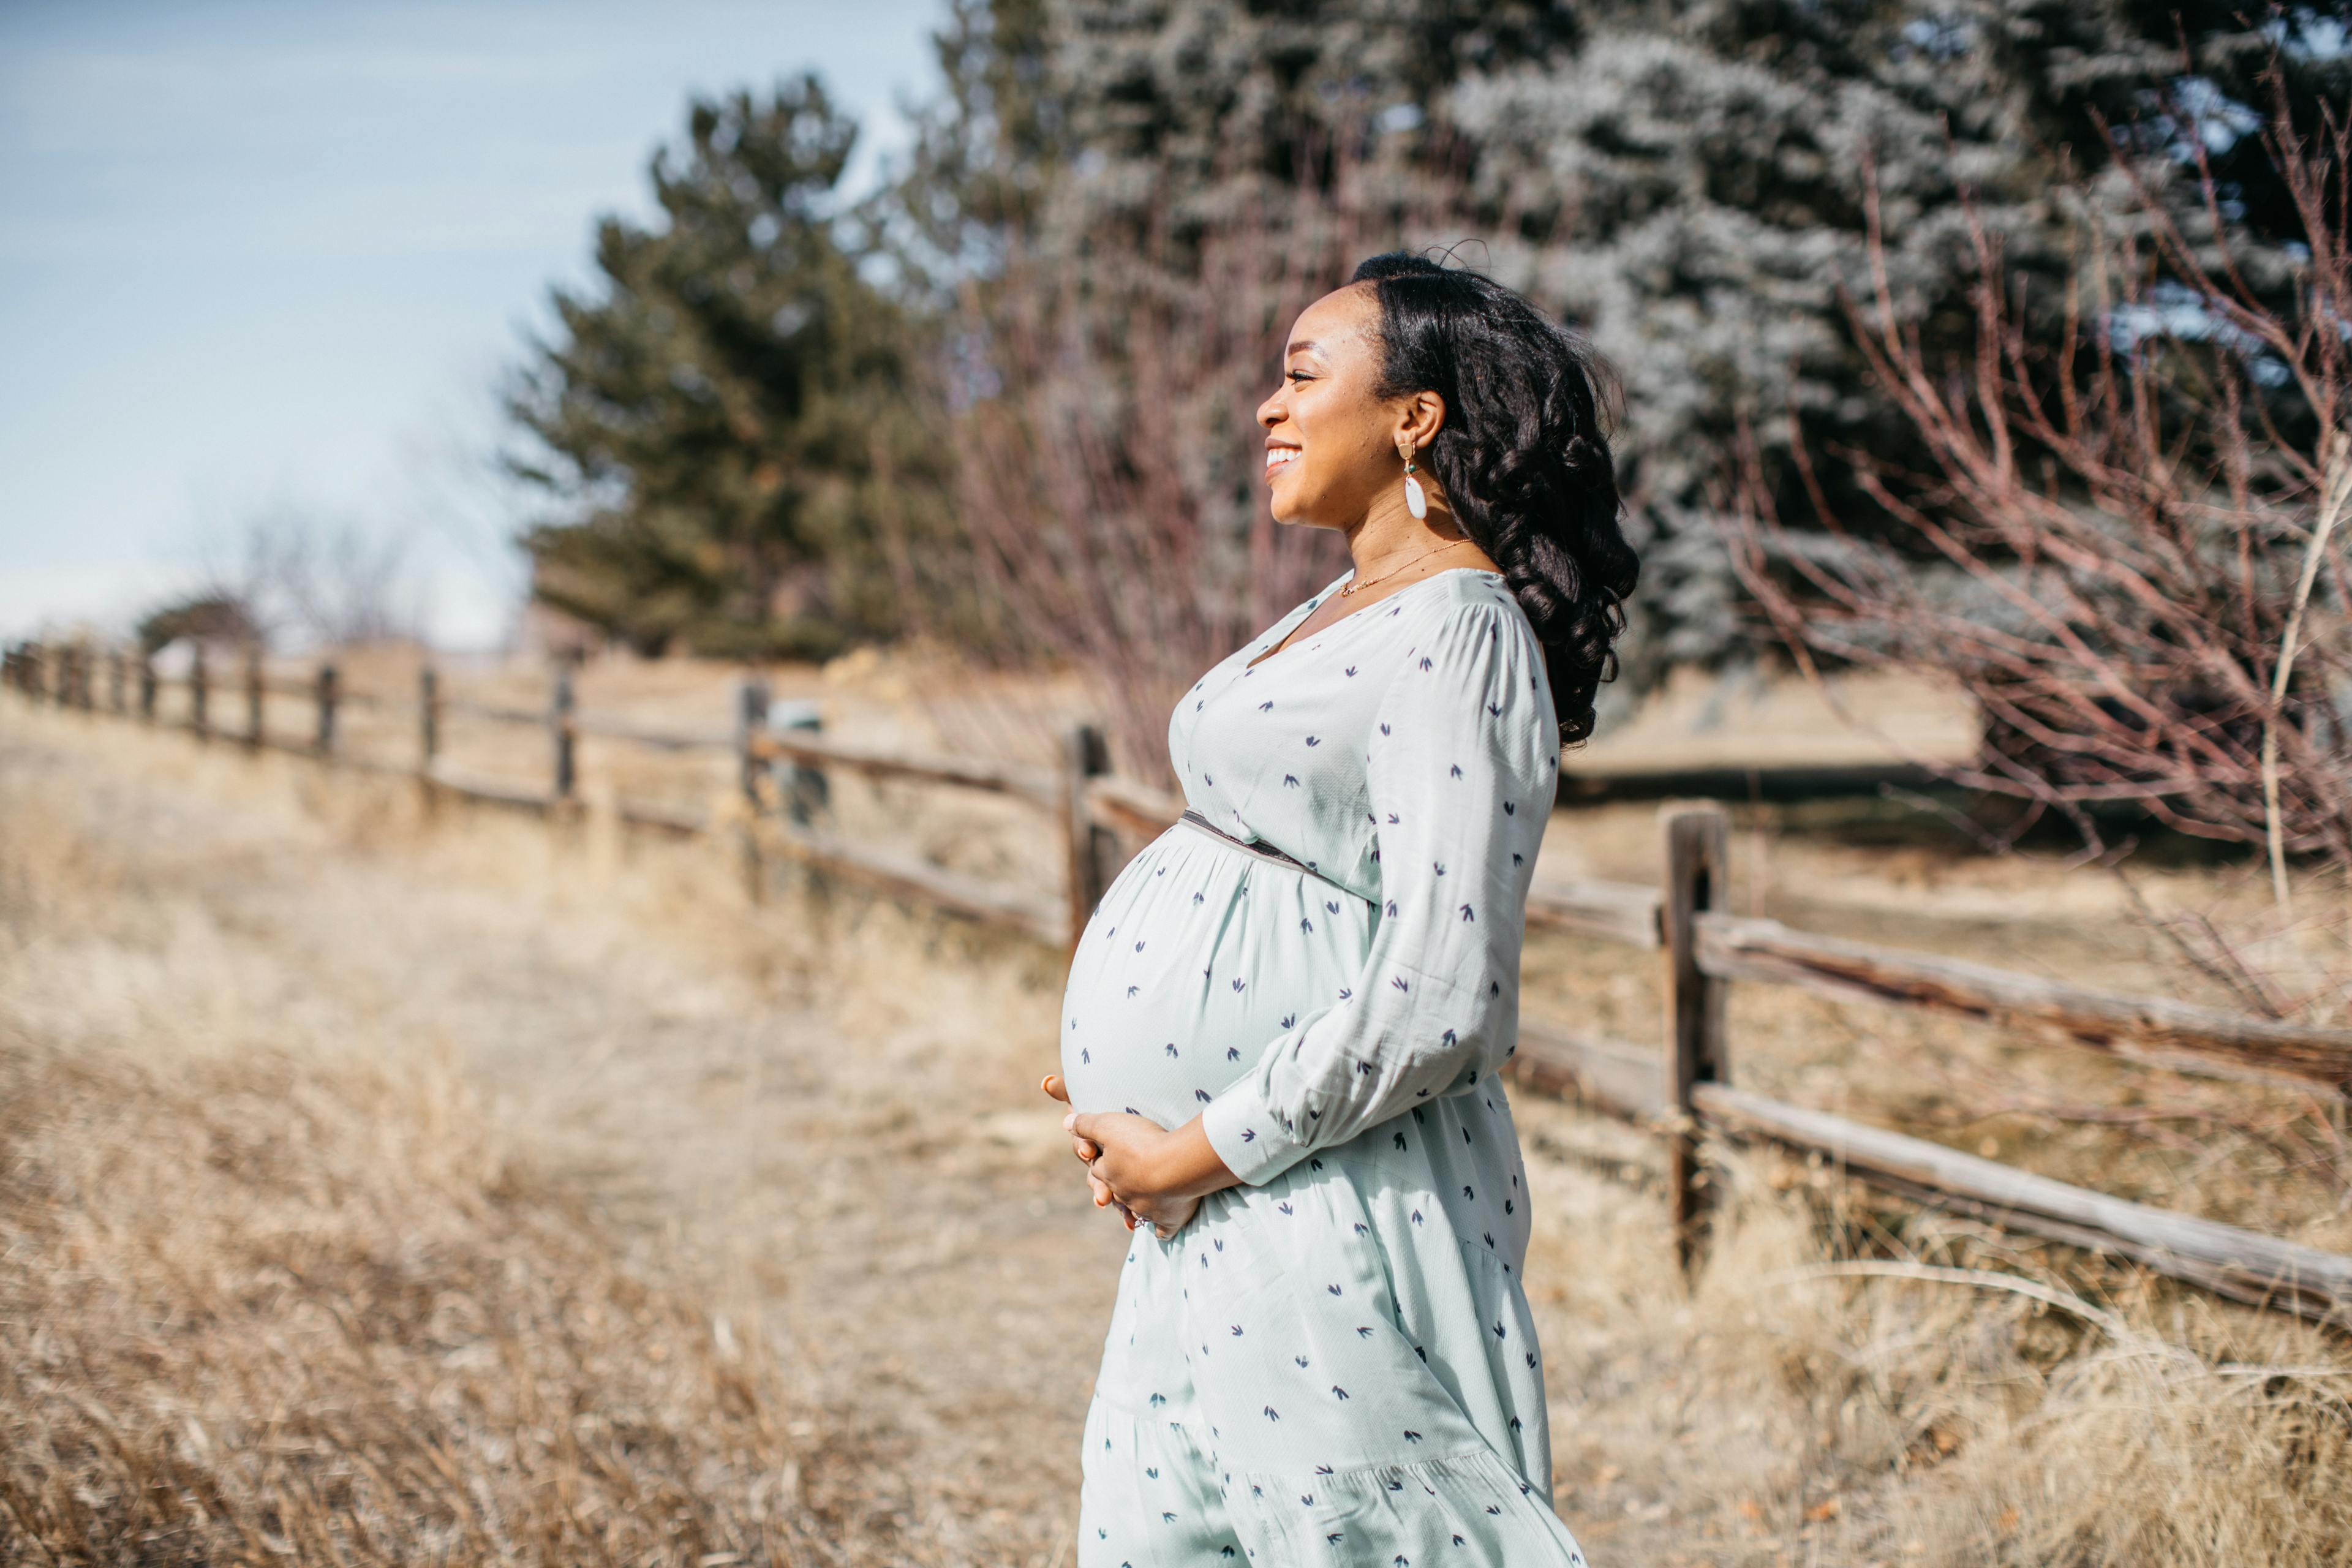 Pregnant woman smiling in a field next to a wooden fence